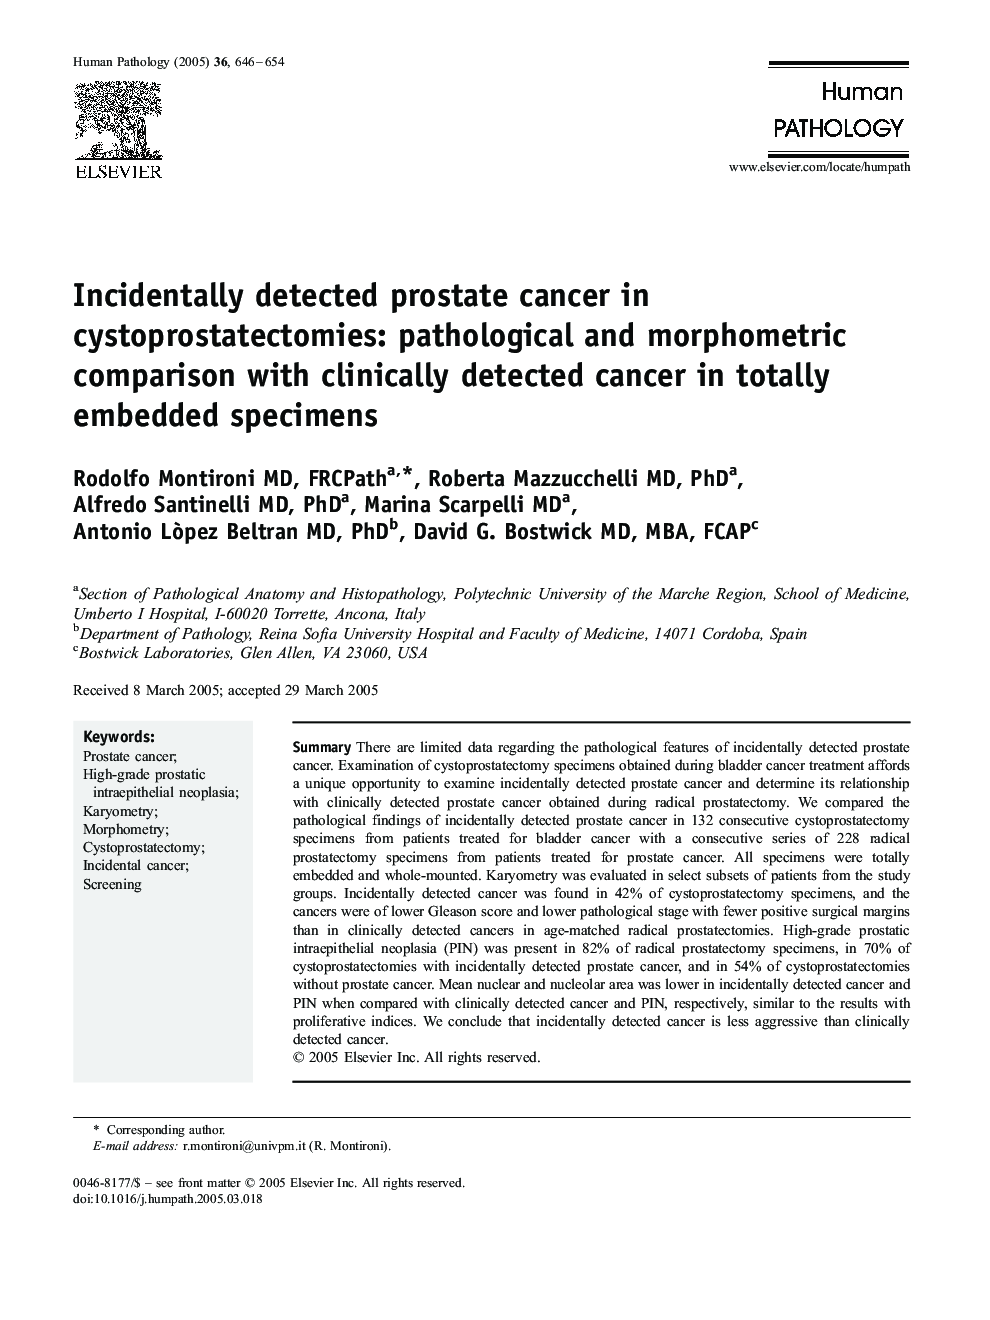 Incidentally detected prostate cancer in cystoprostatectomies: pathological and morphometric comparison with clinically detected cancer in totally embedded specimens